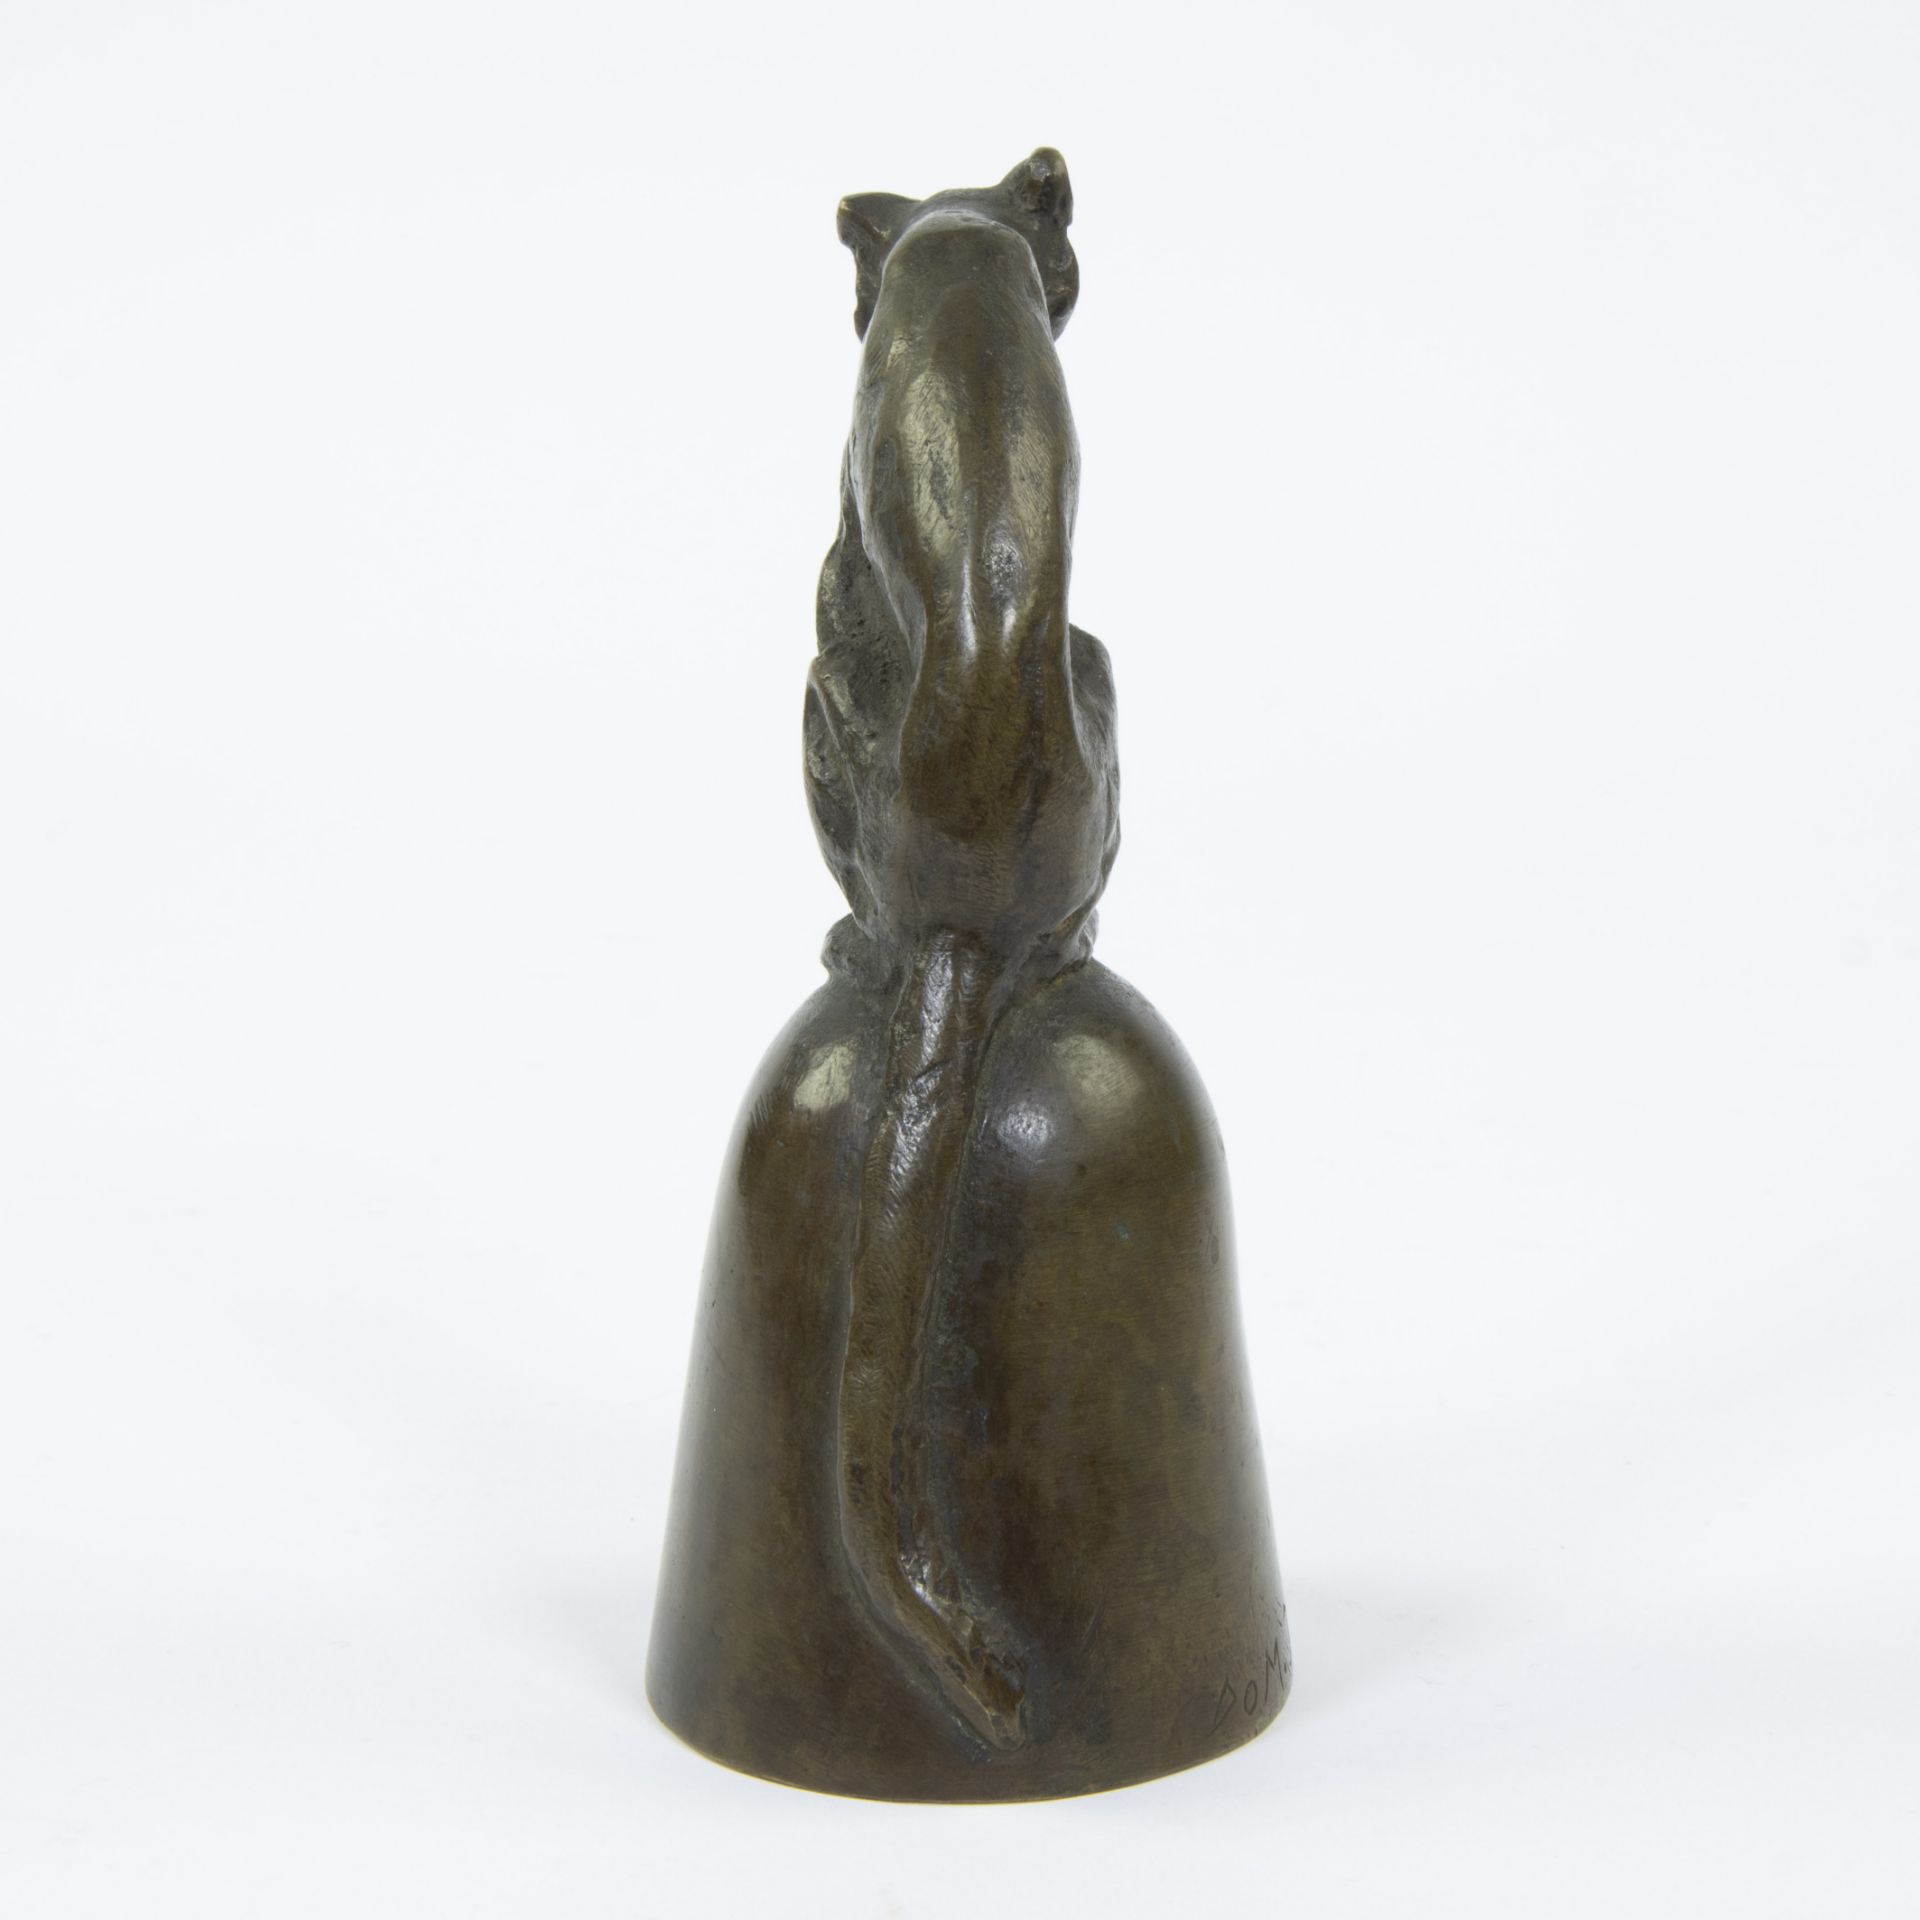 Domien INGELS (1881-1946), bronze bell with panther, signed - Image 5 of 6